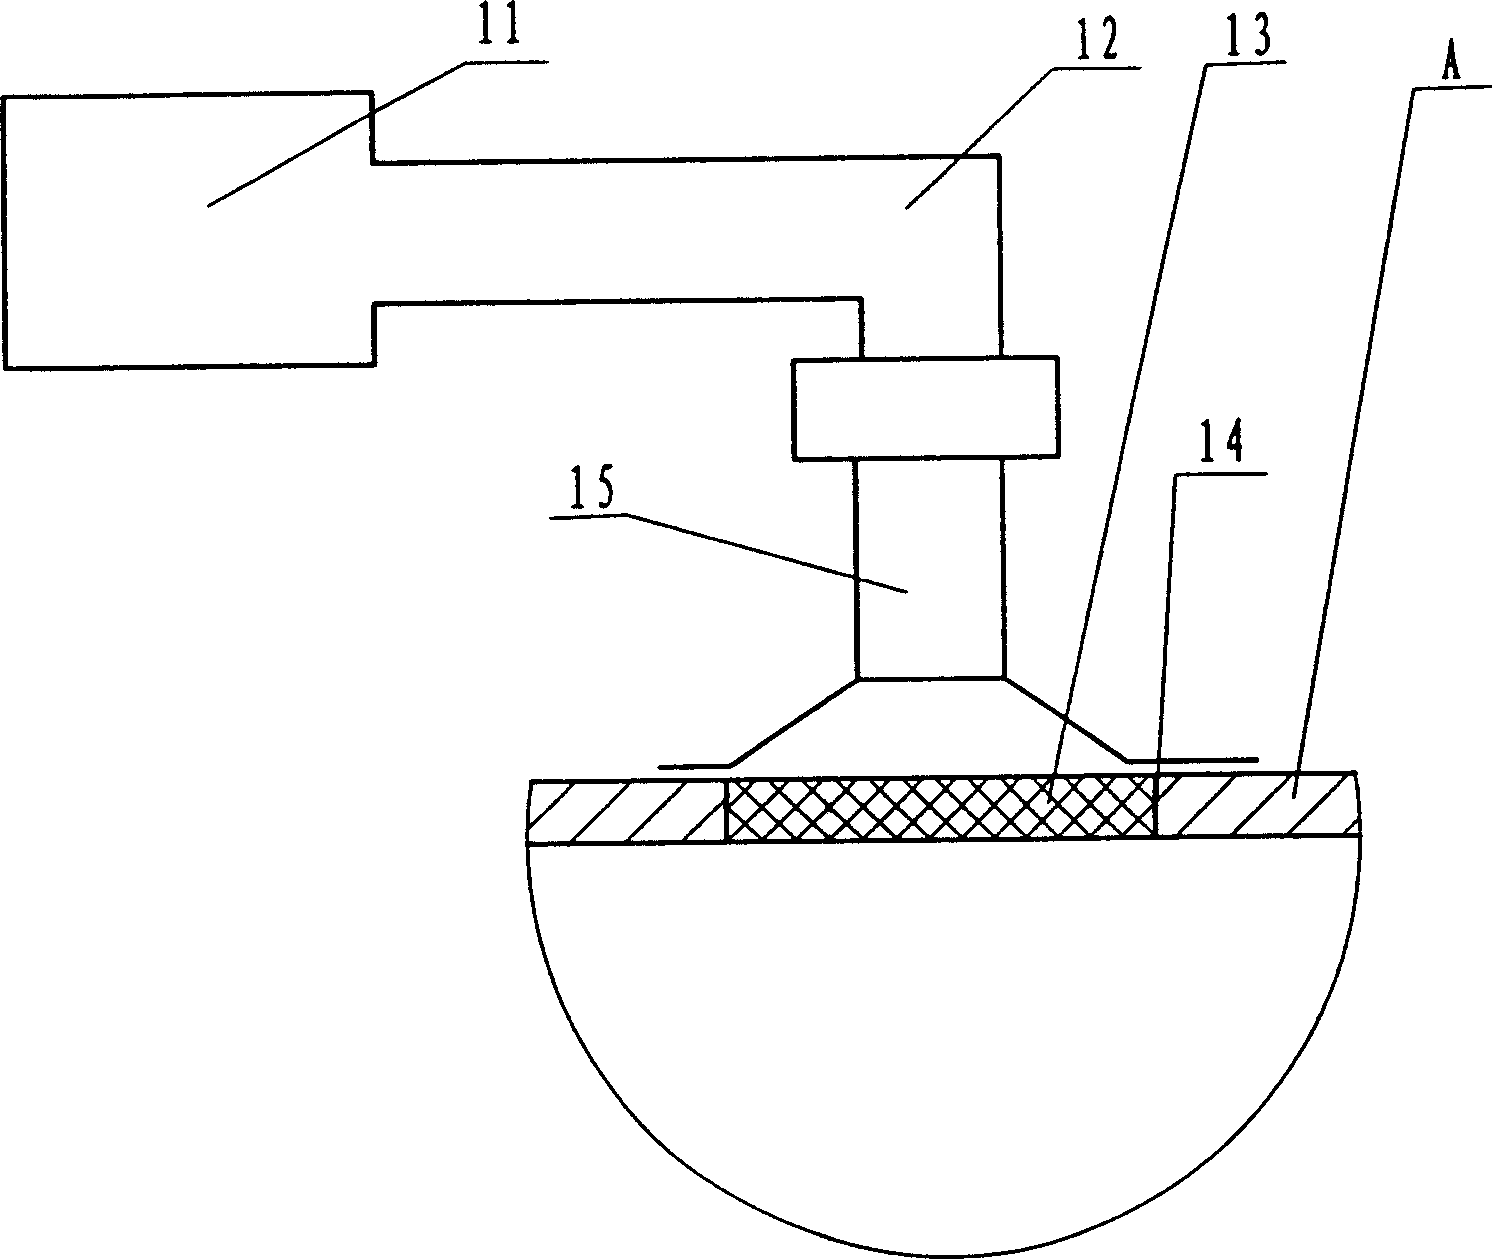 Microwave vacuum continuous drier with two drying chambers and method using the same